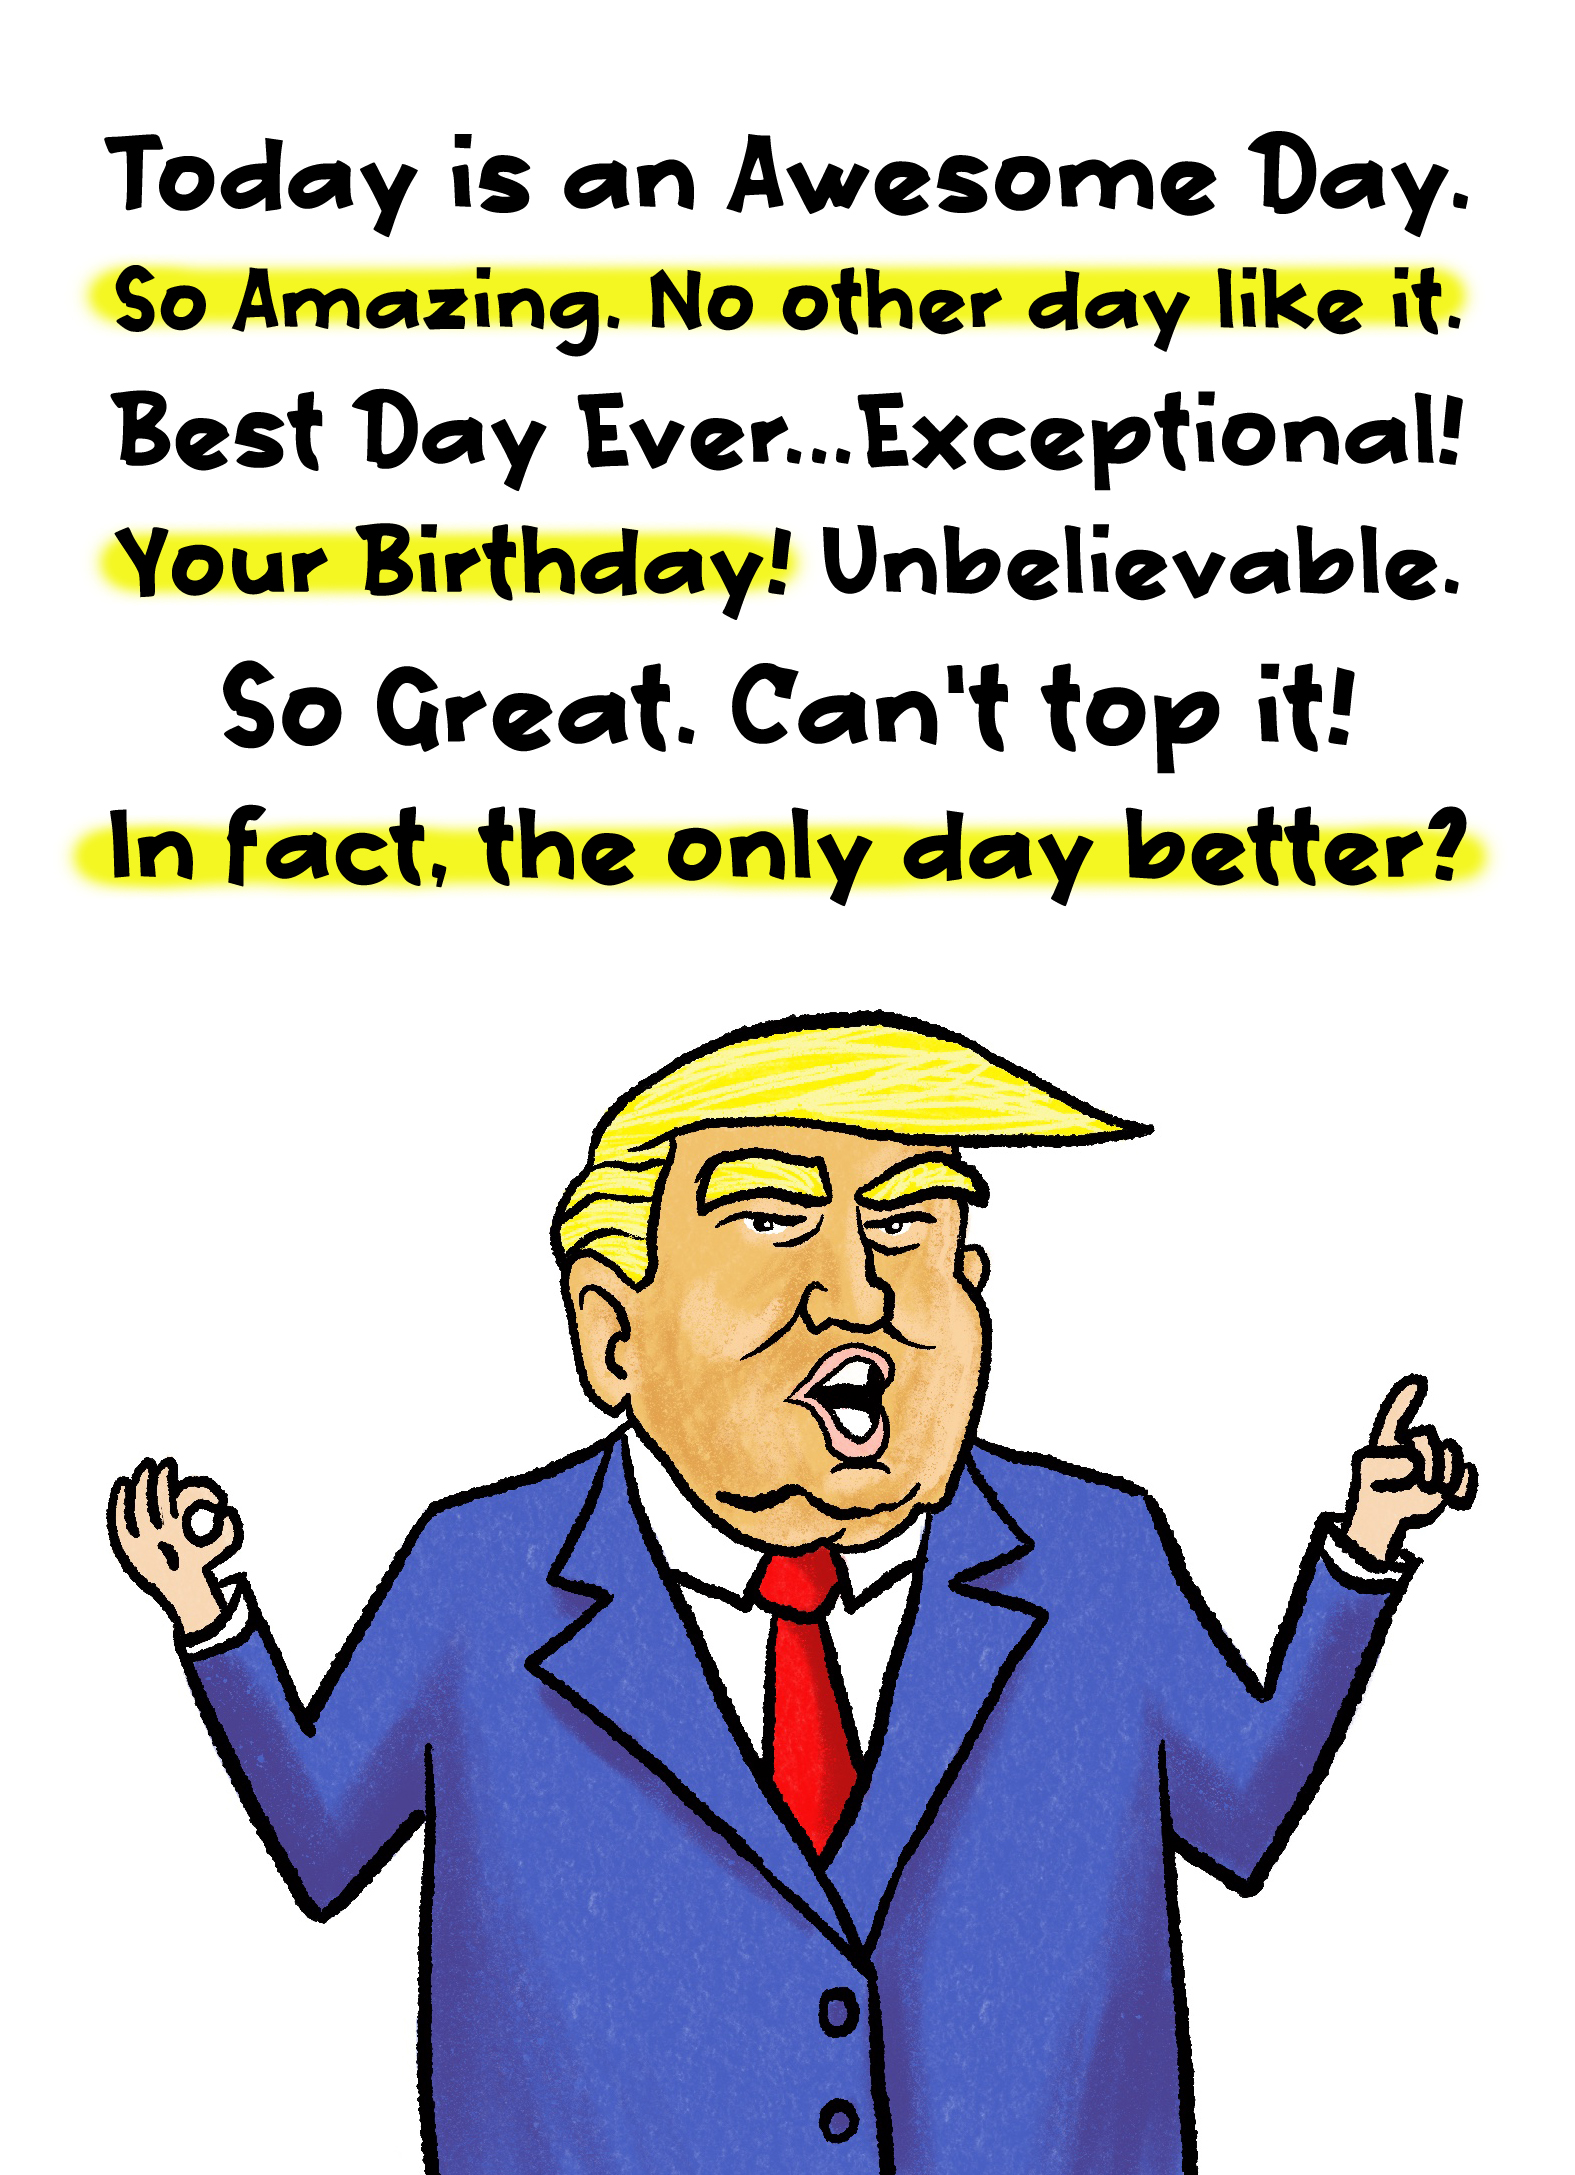 Trump Exceptional Birthday Card Cover